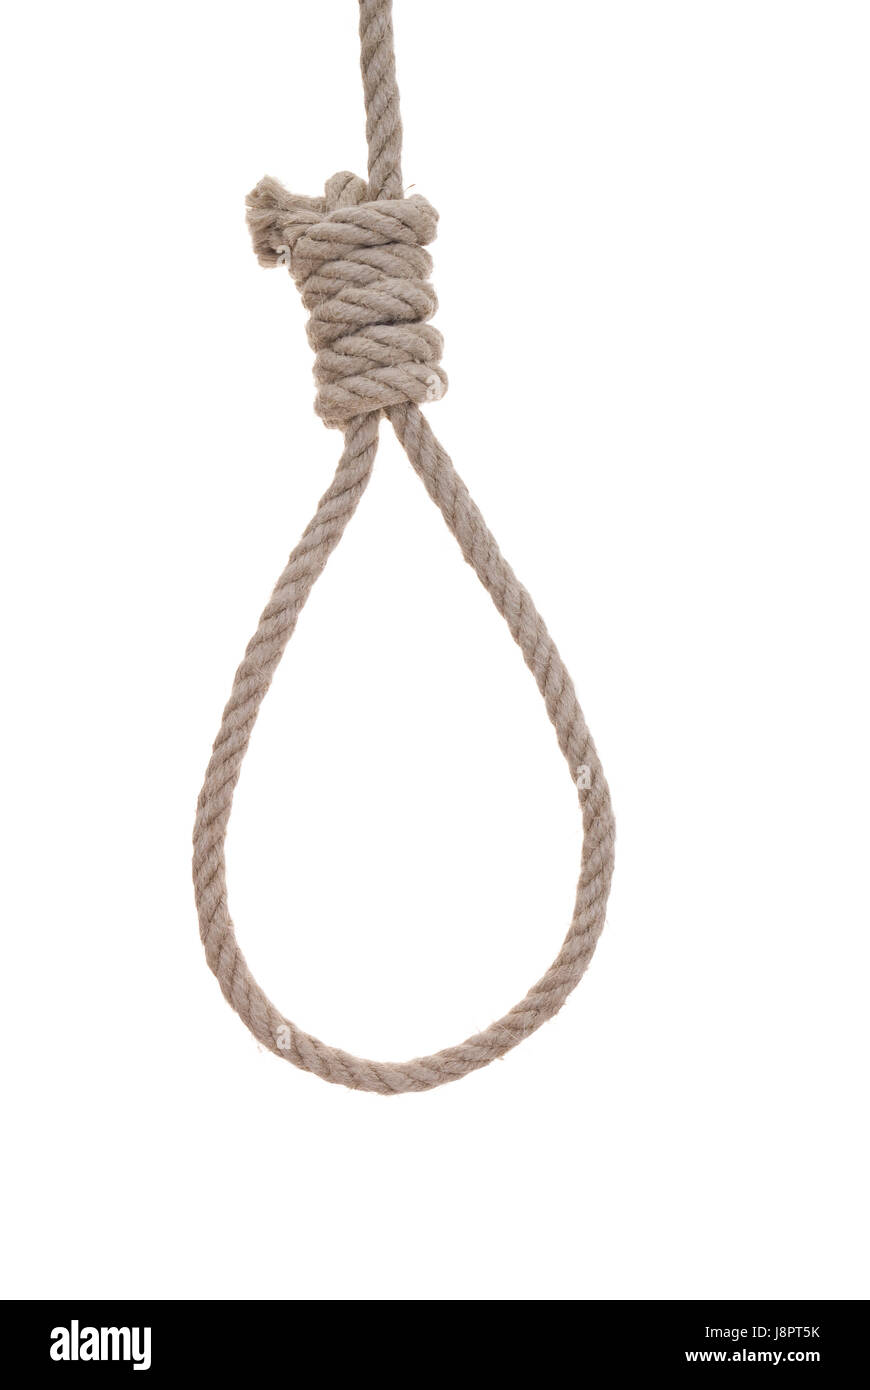 gallows, string, bound, tied, packthreads, equipment, execution, rope, hanging, Stock Photo